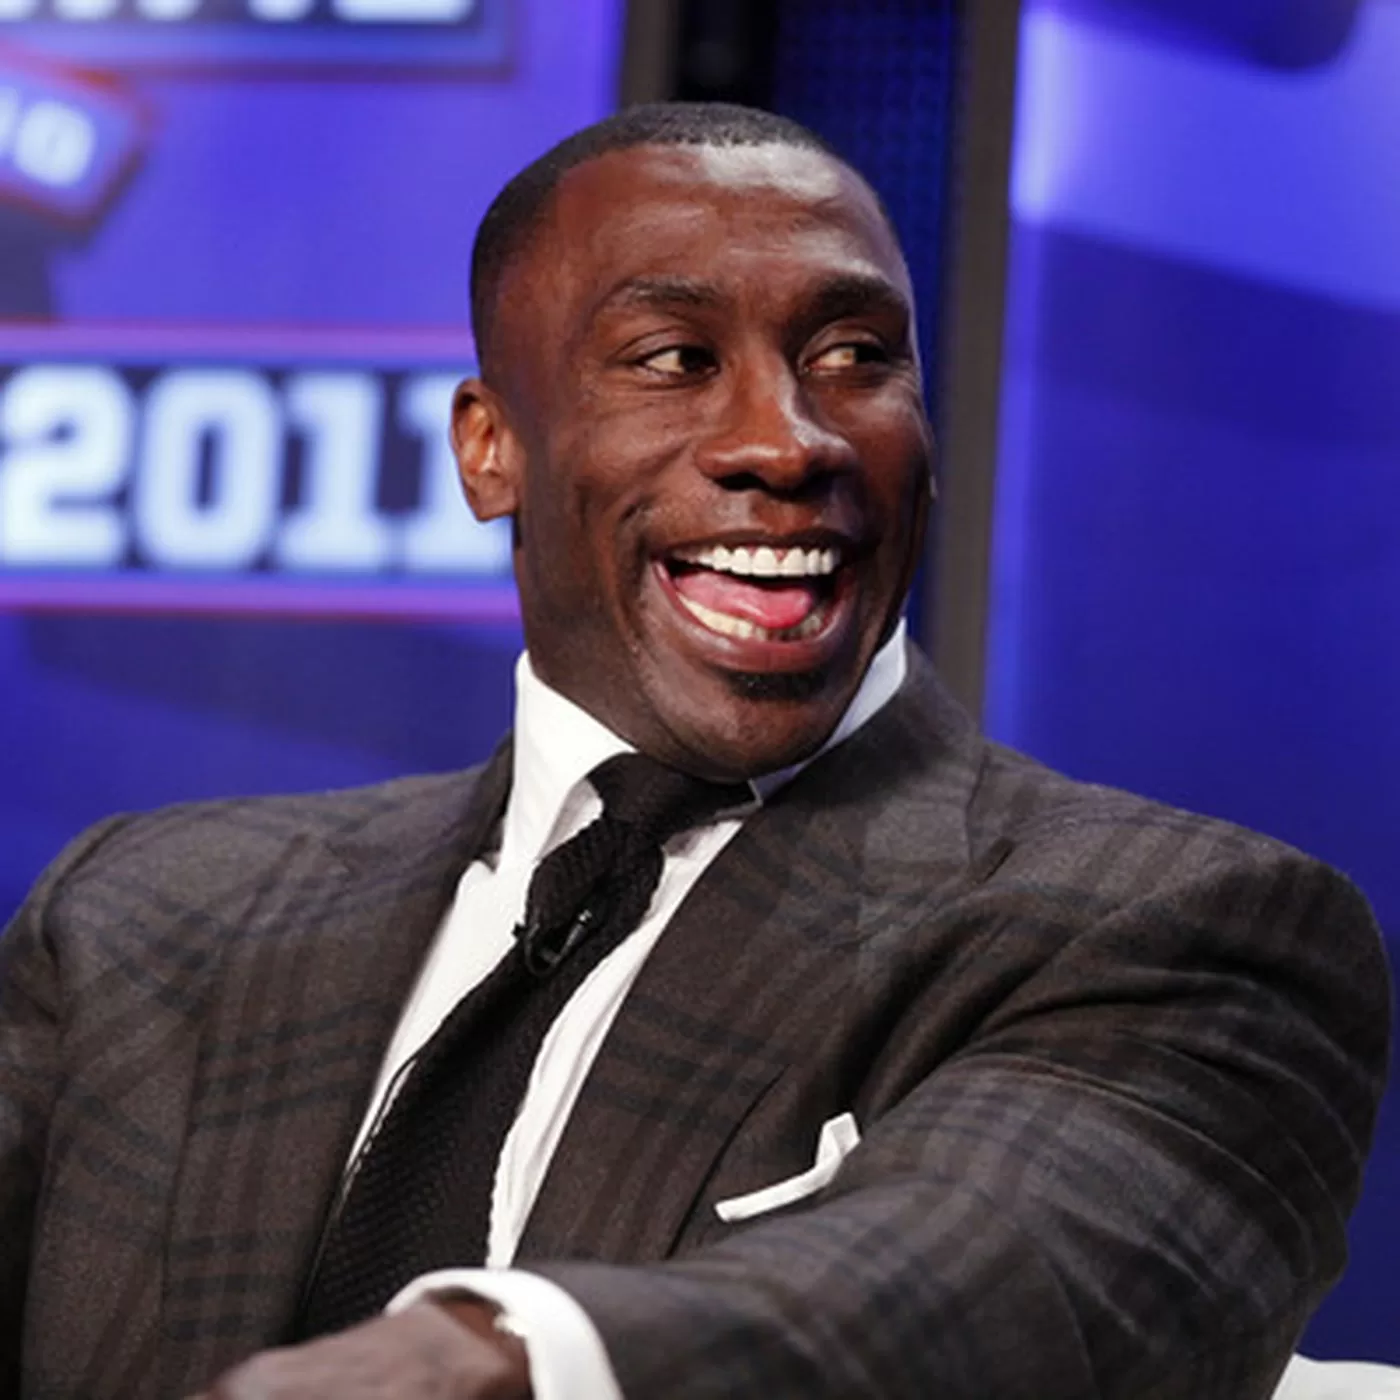 Shannon Sharpe Net Worth: Wealth Accumulation, NFL Success And Media Persona Triumphs